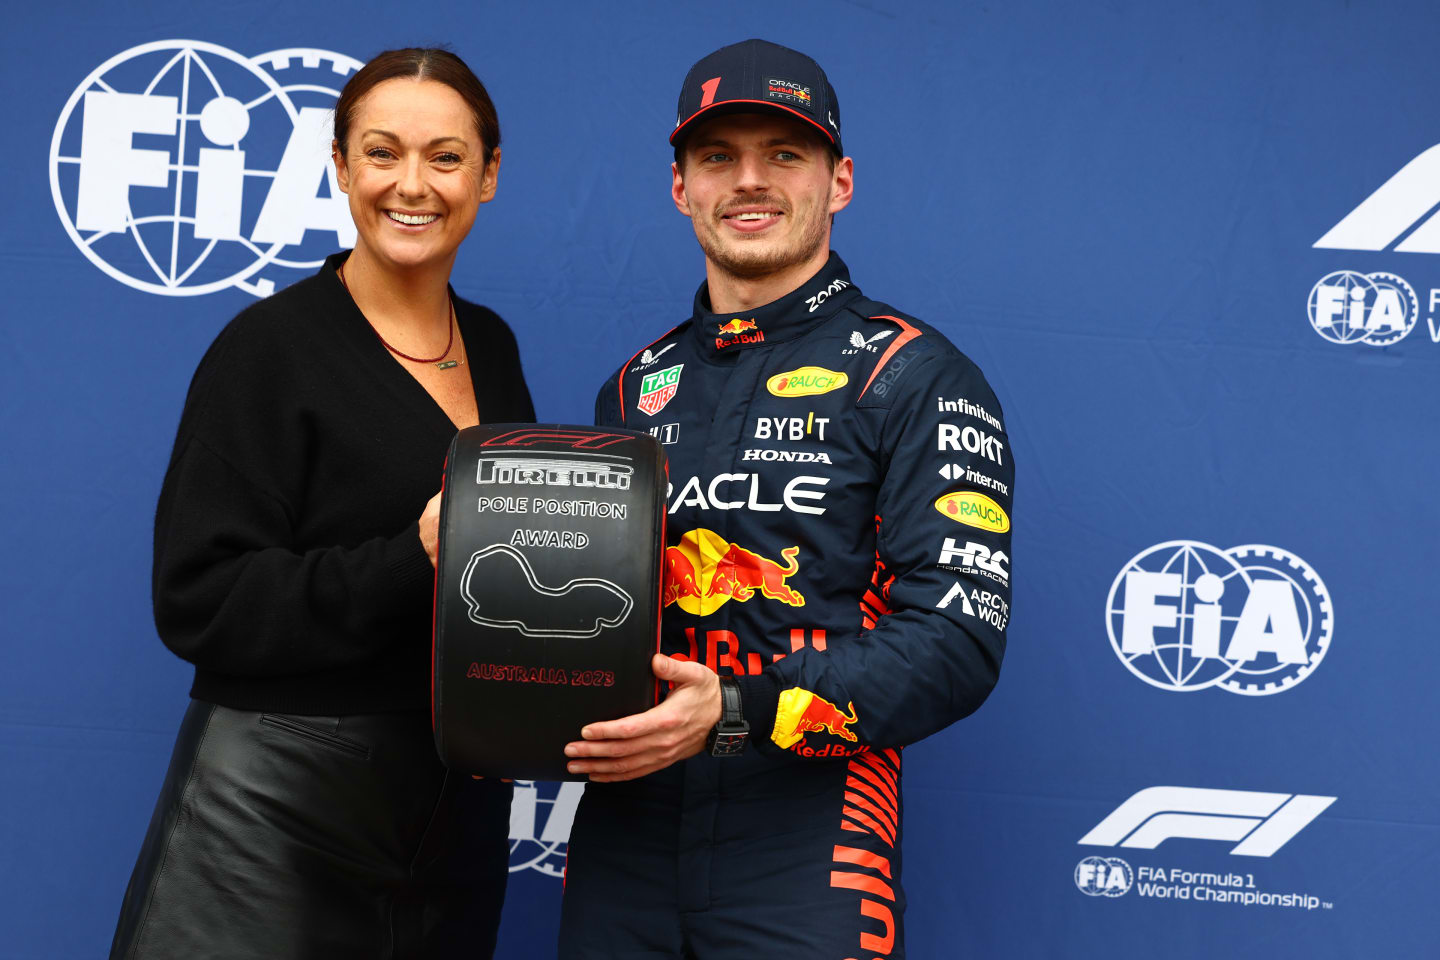 MELBOURNE, AUSTRALIA - APRIL 01: Pole position qualifier Max Verstappen of the Netherlands and Oracle Red Bull Racing is presented with the Pirelli Pole Position trophy by Celeste Barber in parc ferme during qualifying ahead of the F1 Grand Prix of Australia at Albert Park Grand Prix Circuit on April 01, 2023 in Melbourne, Australia. (Photo by Mark Thompson/Getty Images)